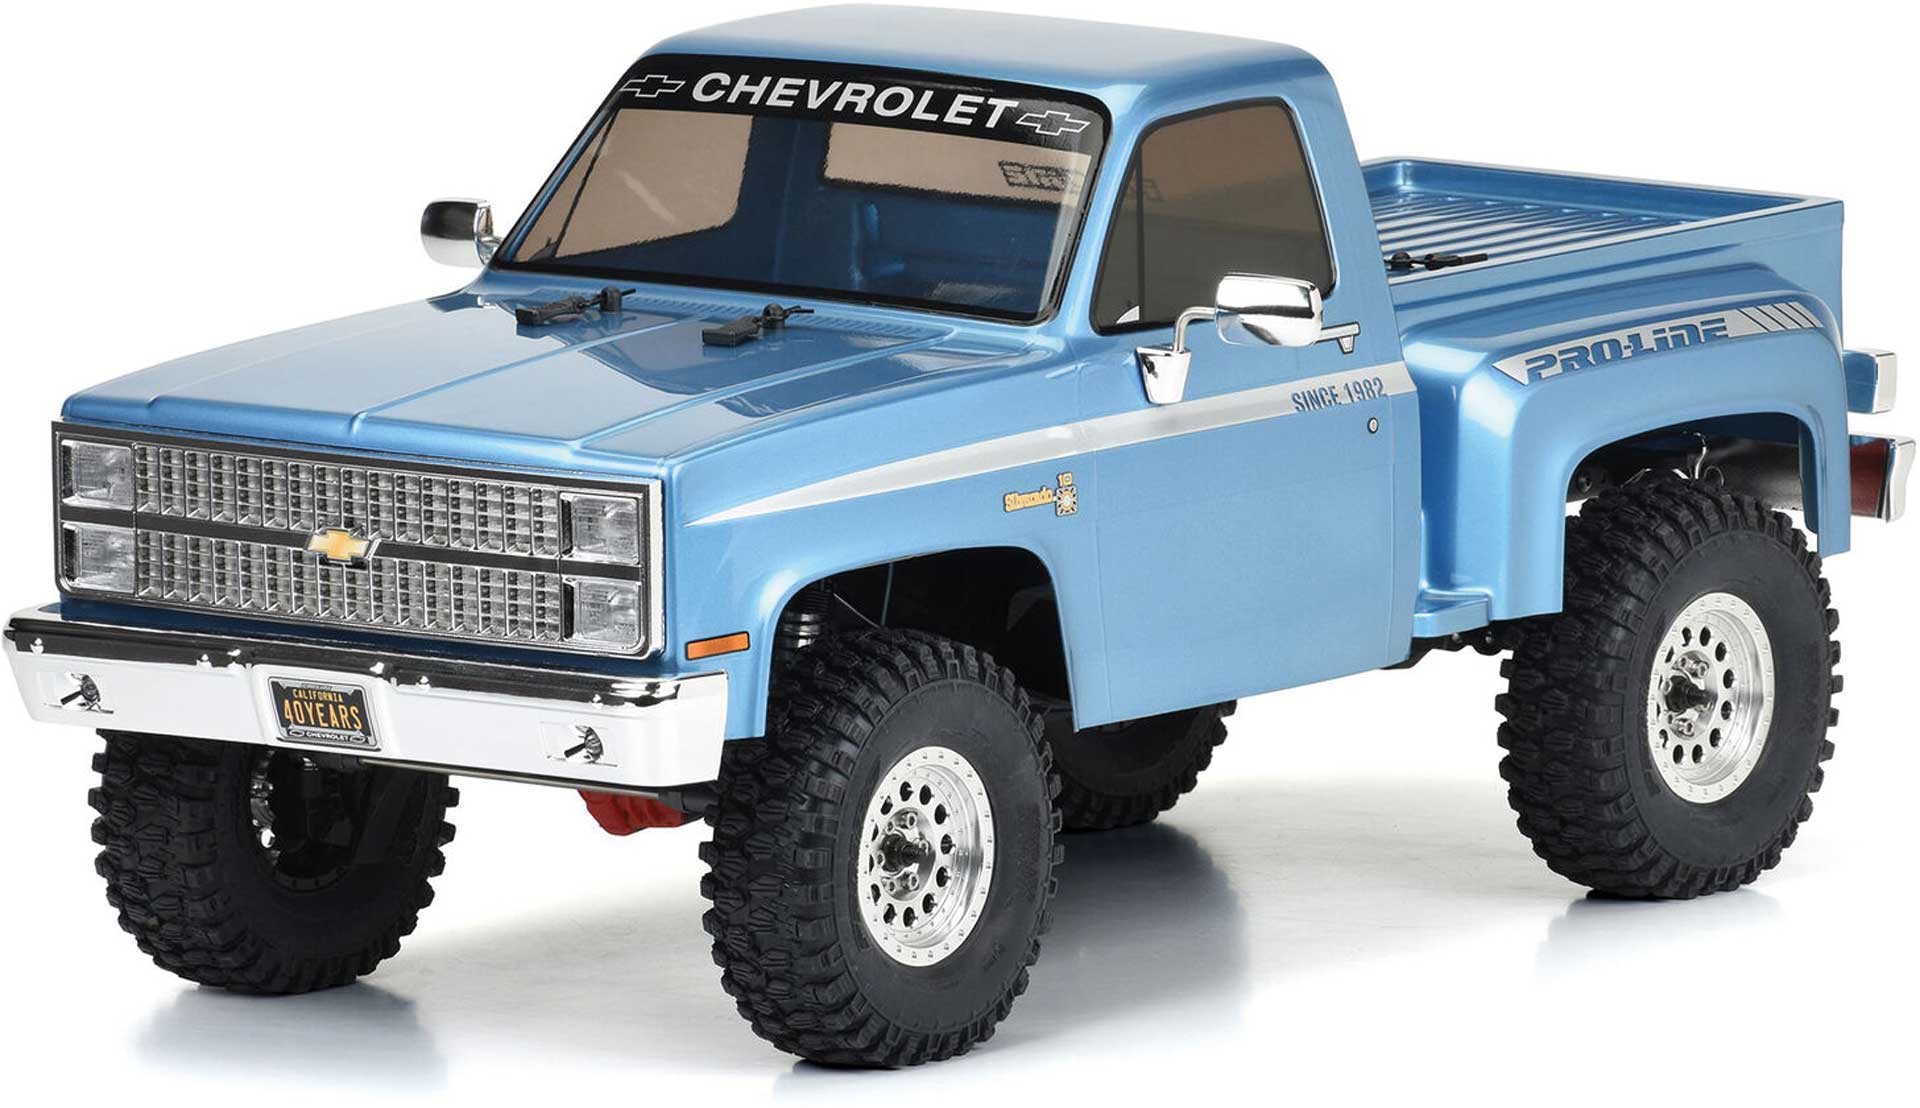 AXIAL SCX10 III Base Camp Proline 1982 Chevrolet K10 4WD Rock Crawler Brushed RTR